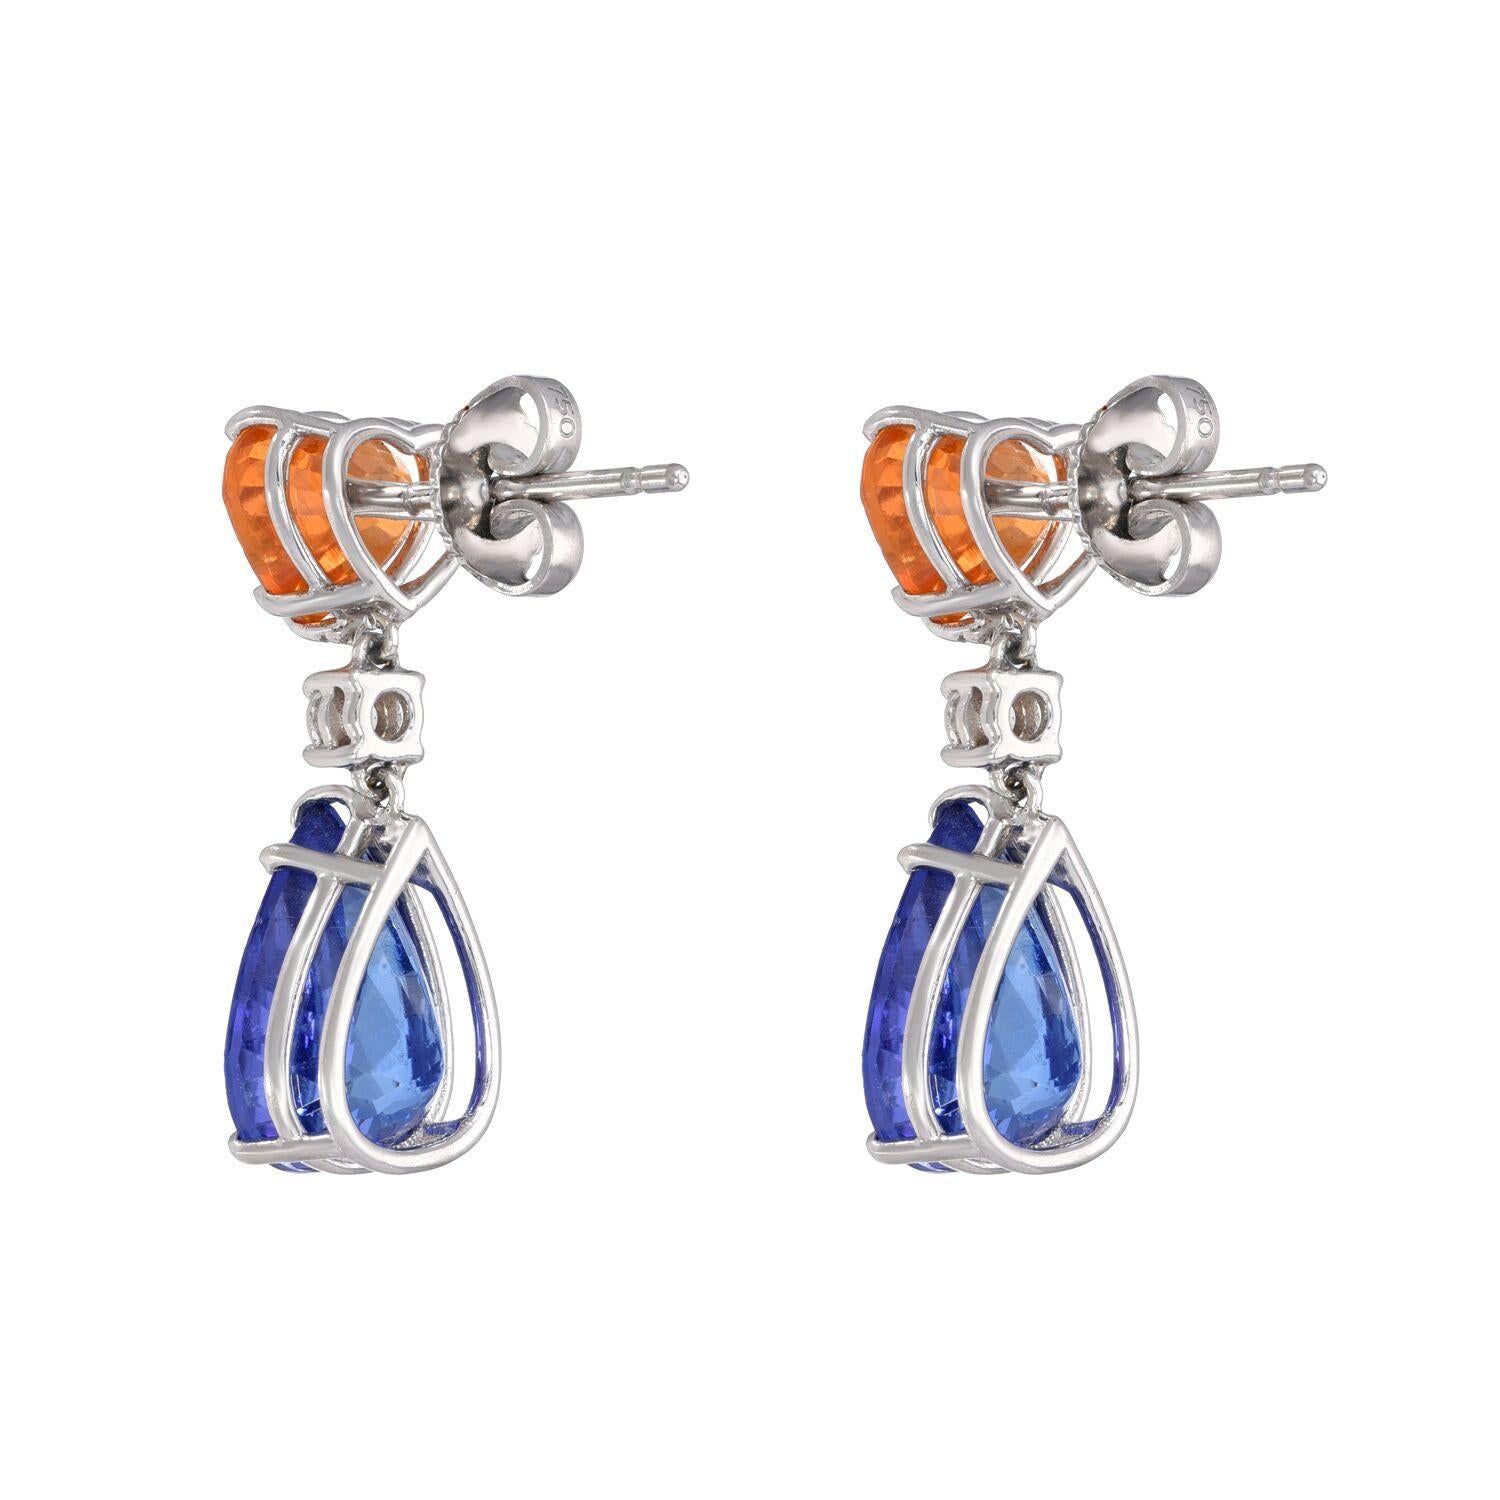 Marvelous pair of Tanzanite pear shapes weighing a total of 7.03 carats are suspended from a pair of heat shaped Mandarin Garnets weighing a total of 3.89 carats, and marquise shaped diamonds weighing a total of 0.19 carats, creating this rich and